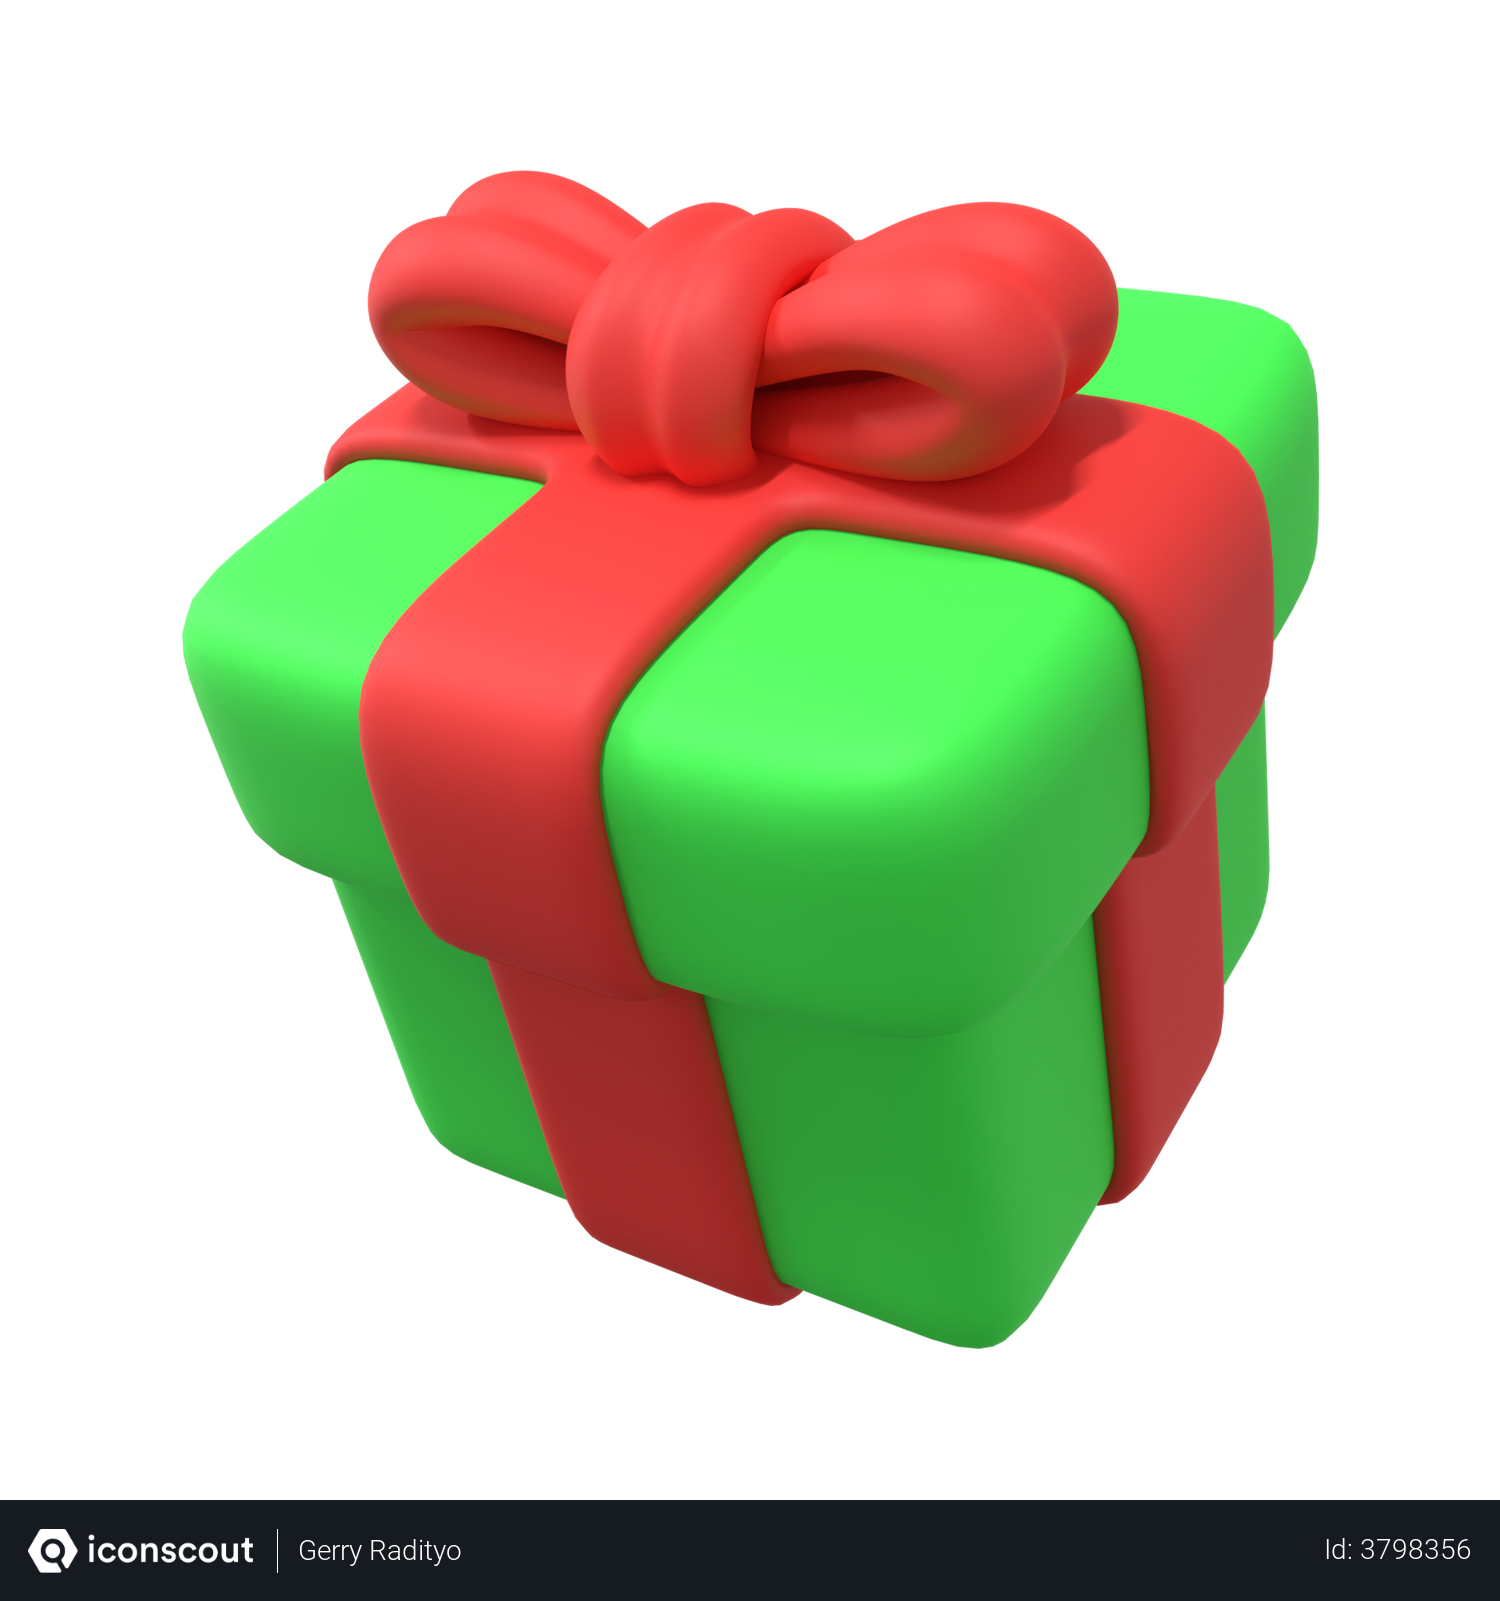 Gift box PNG image transparent image download, size: 2310x2770px